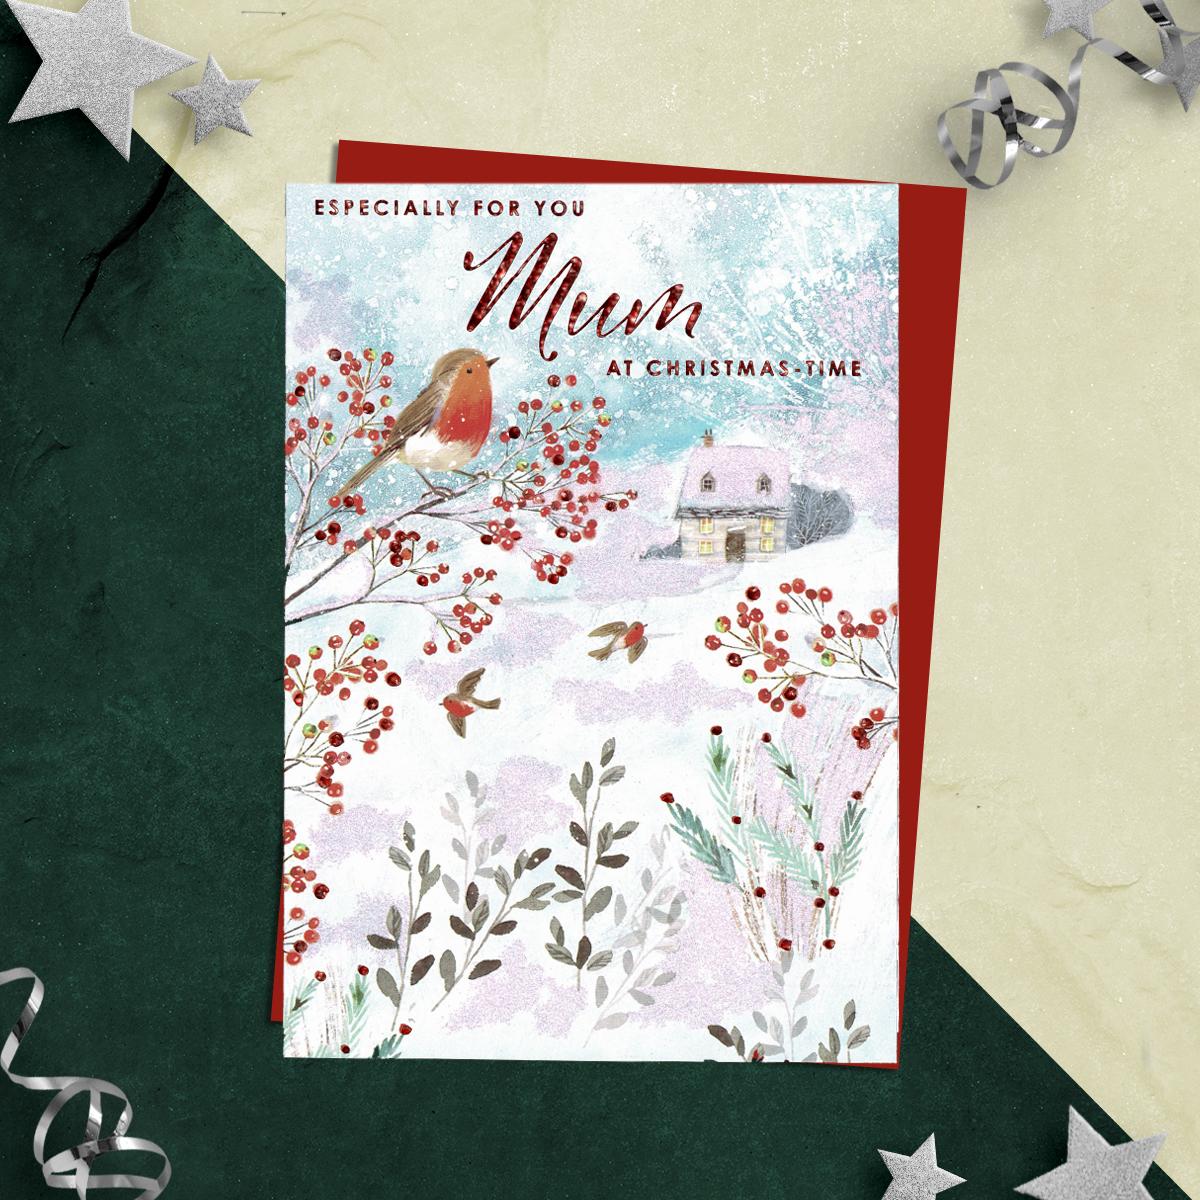 Especially For You Mum At Christmas-Time Featuring Robins In A Snowy Scene! Finished with Red Foil Detail, Sparkle, Red Envelope And Printed Insert